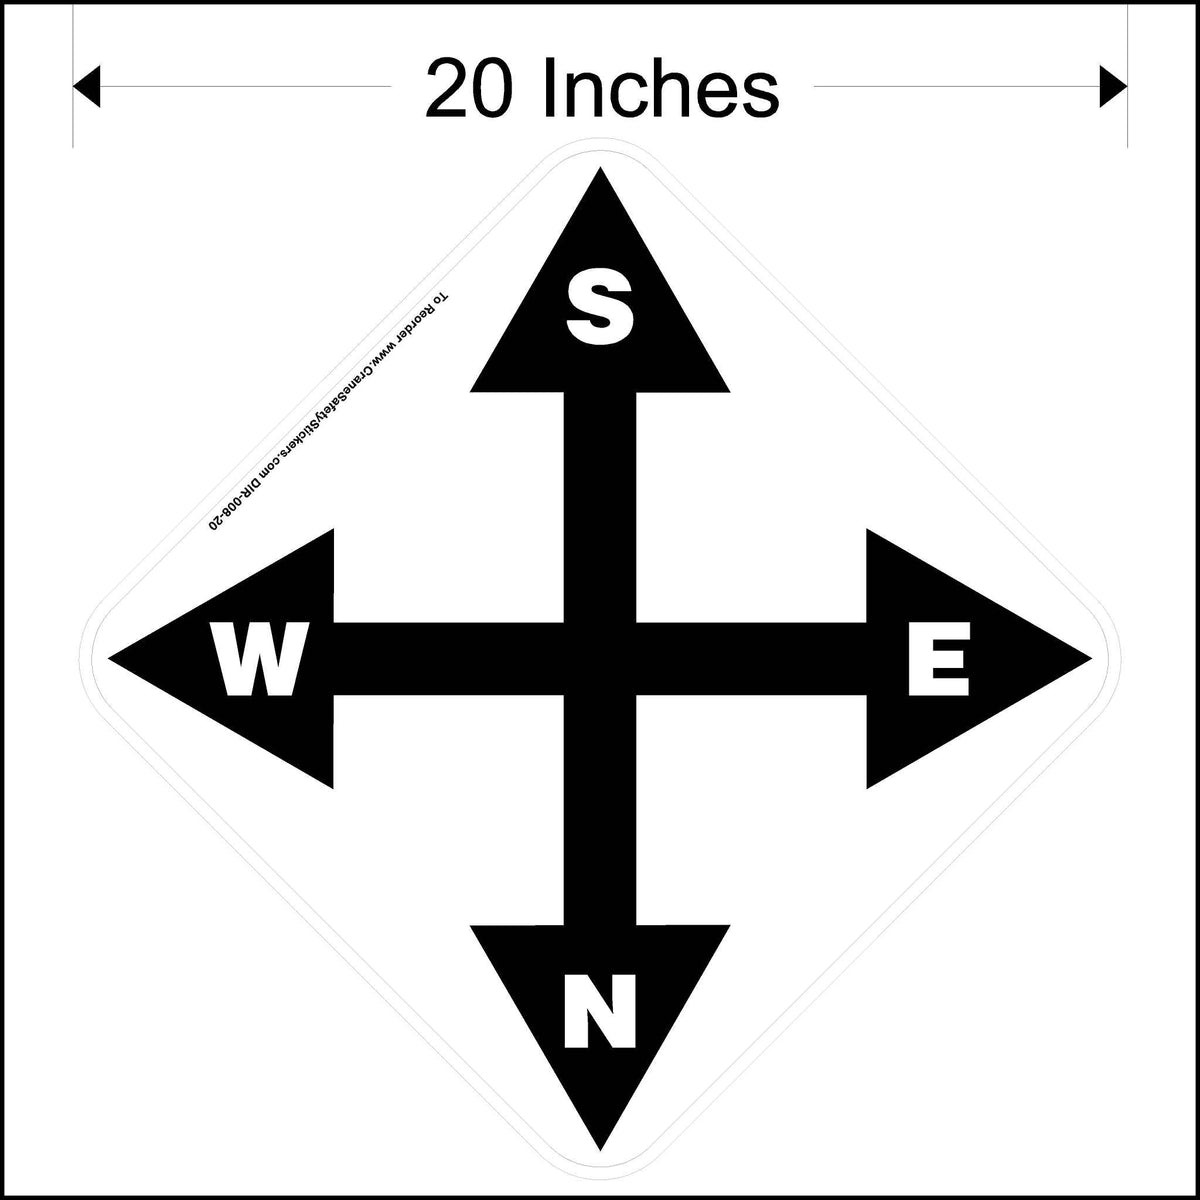 20 Inch South, east, north, and west overhead crane directional decal. Printed in black and white.